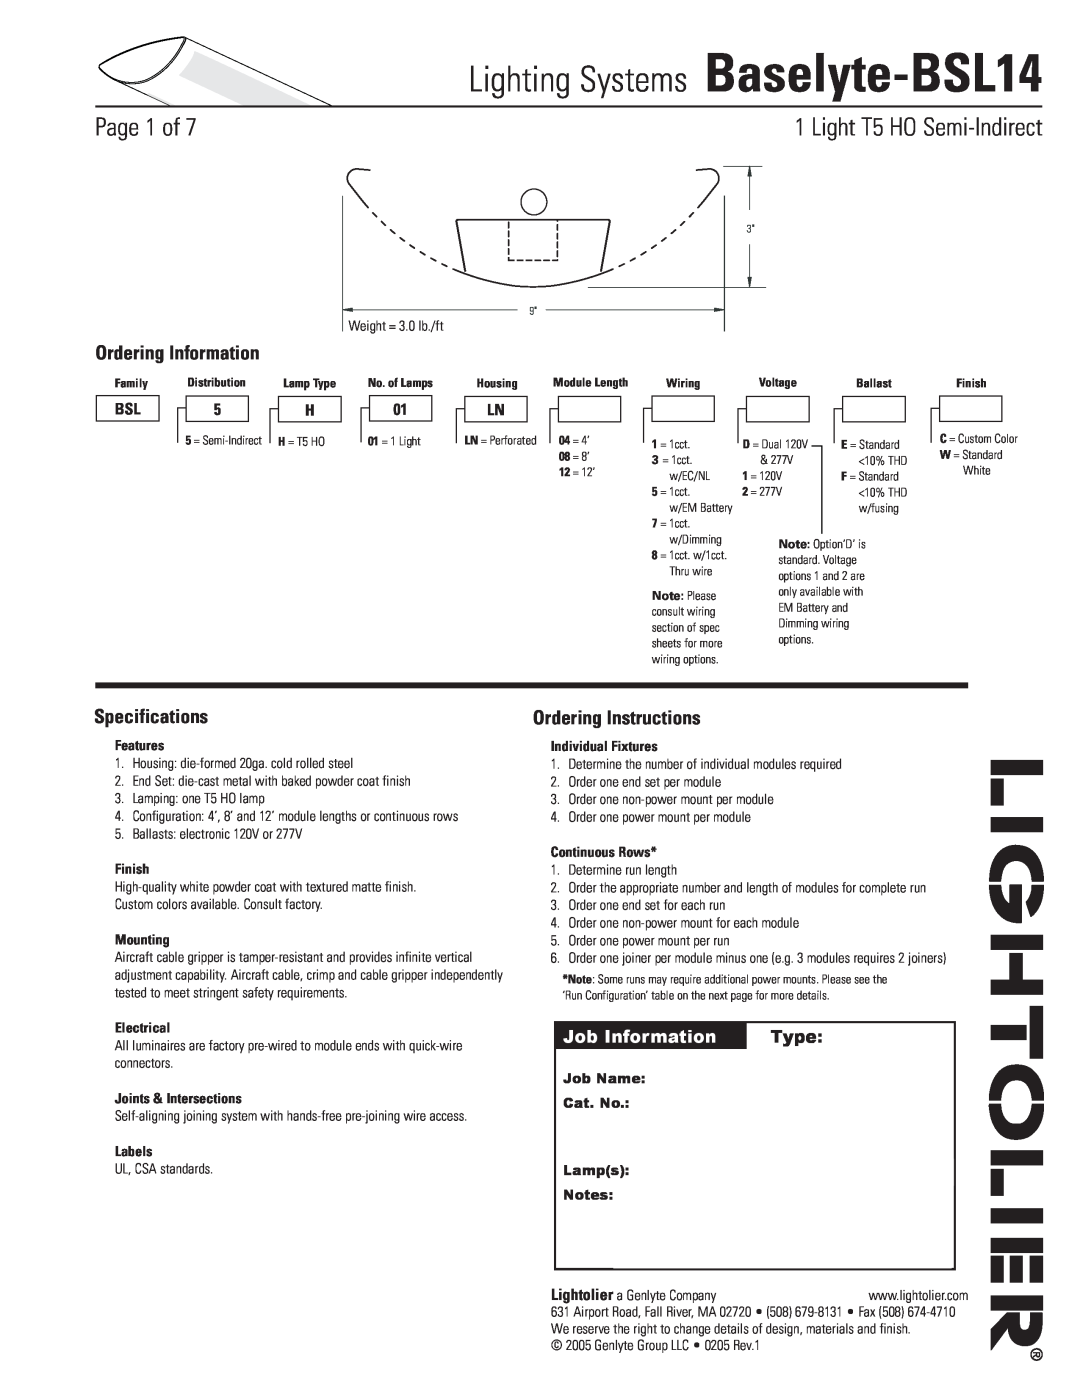 Lightolier specifications Lighting Systems Baselyte-BSL14, Page  of,  Light T5 HO Semi-Indirect, Ordering Information 